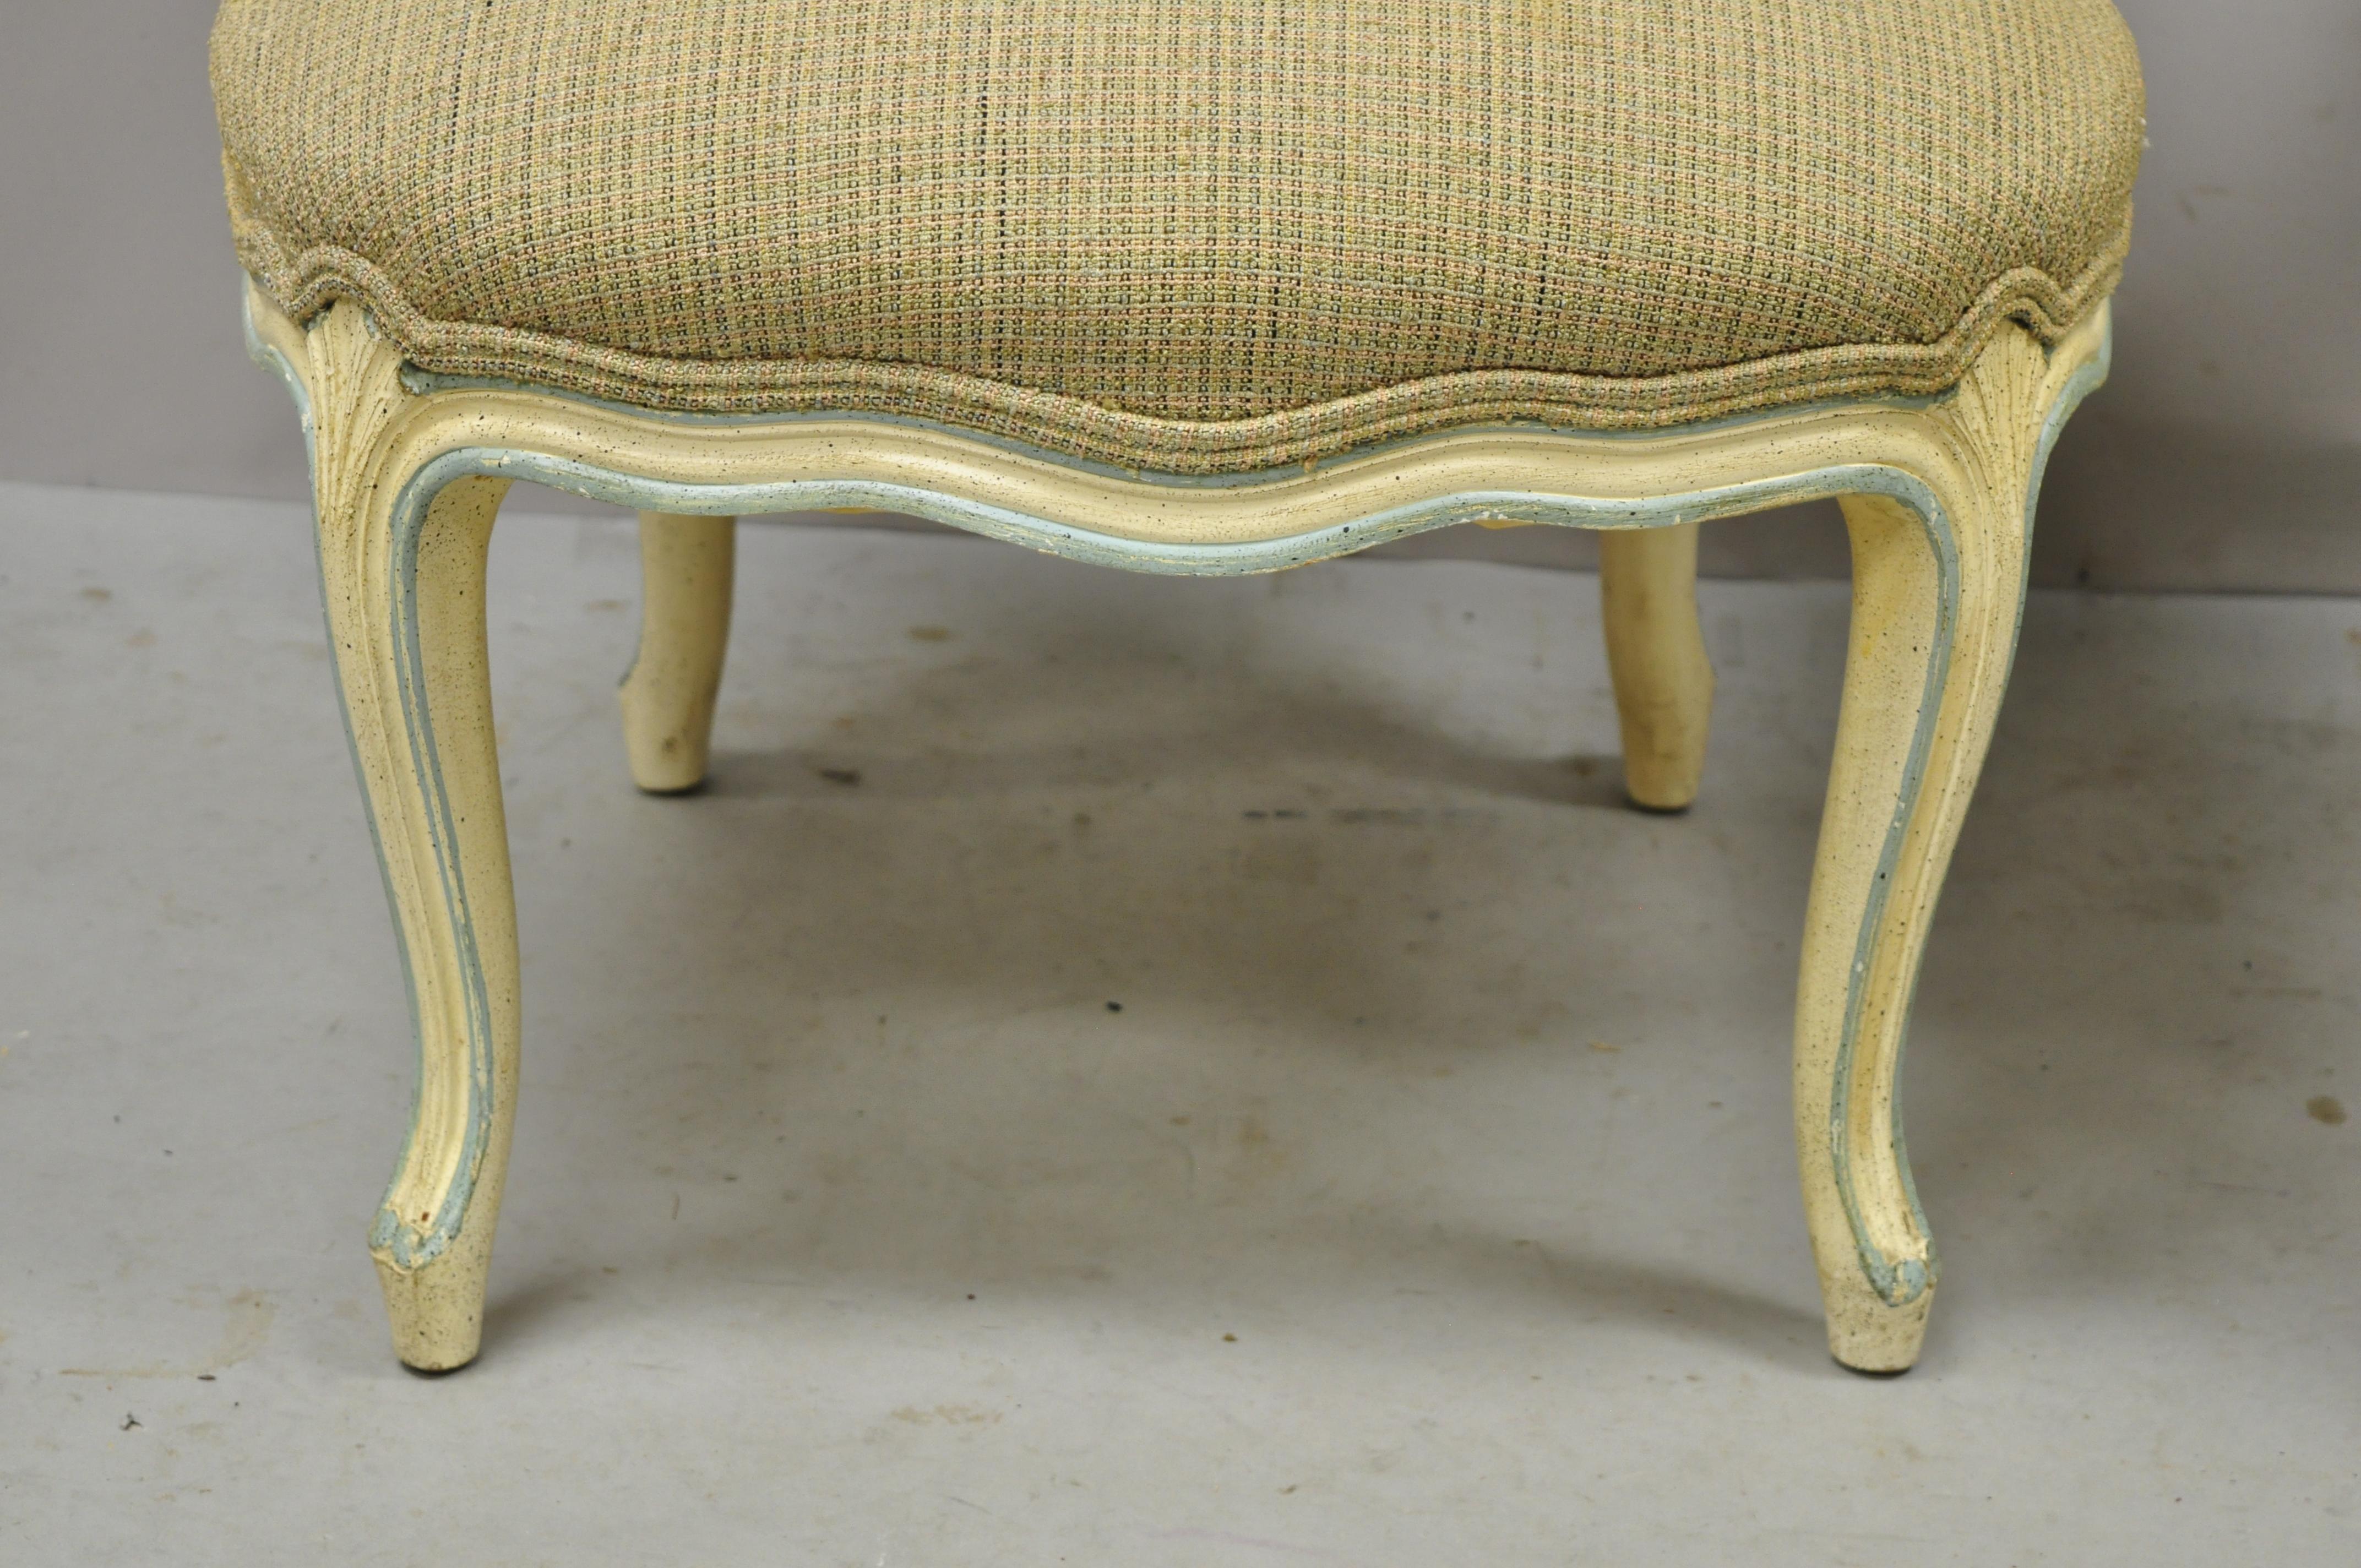 French Provincial Louis XV Cream Blue Hiprest Boudoir Slipper Chairs, a Pair For Sale 2